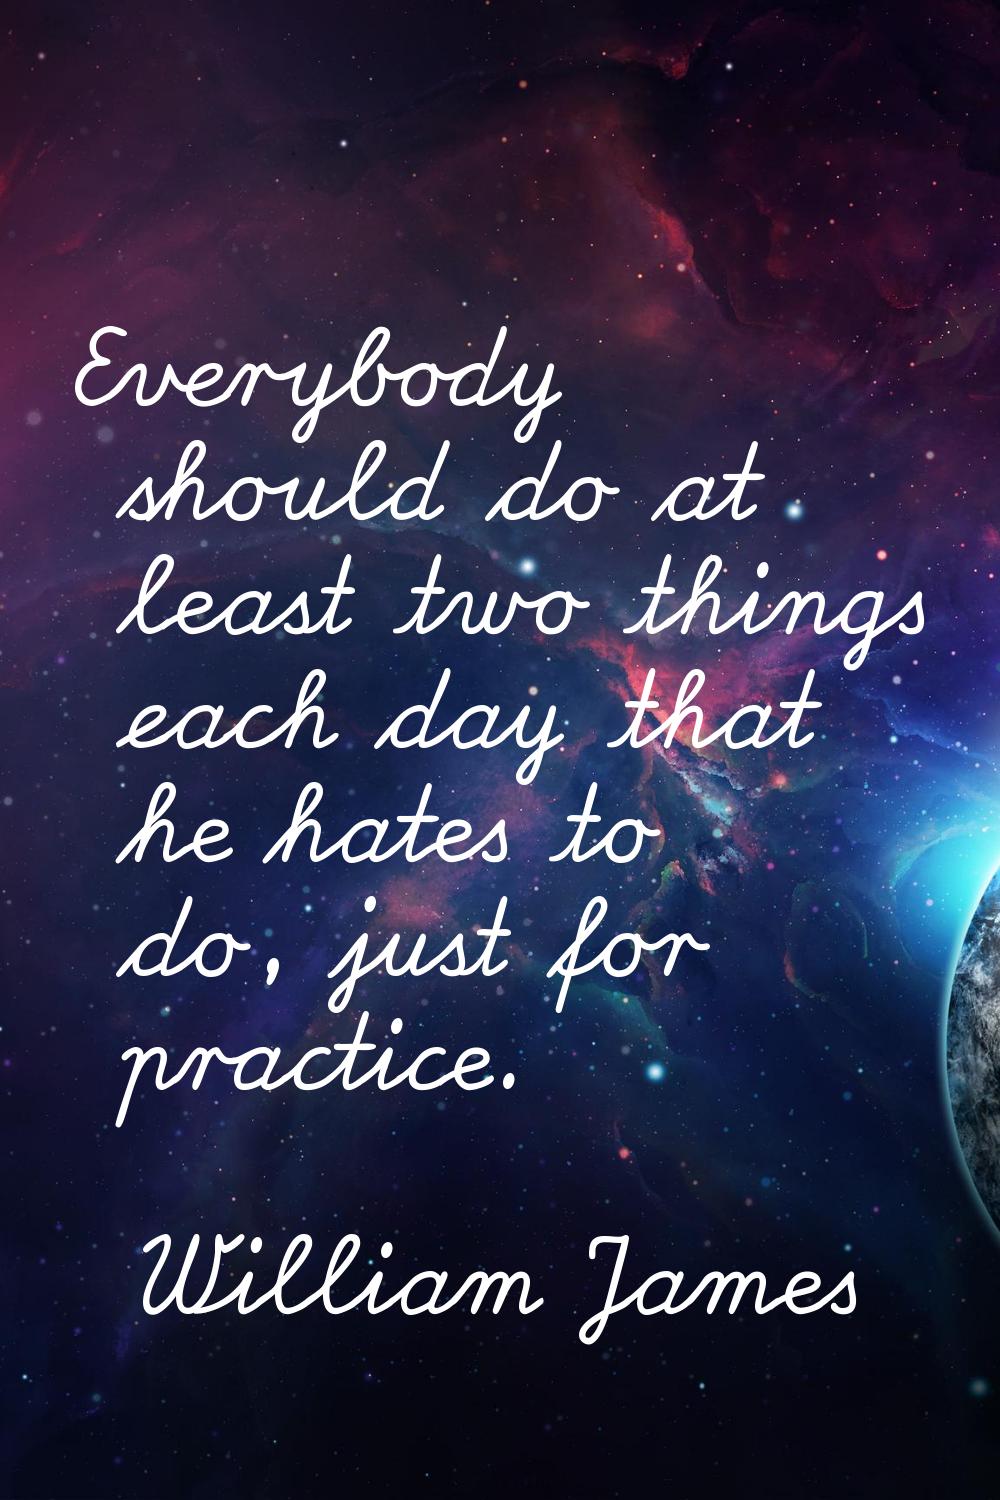 Everybody should do at least two things each day that he hates to do, just for practice.